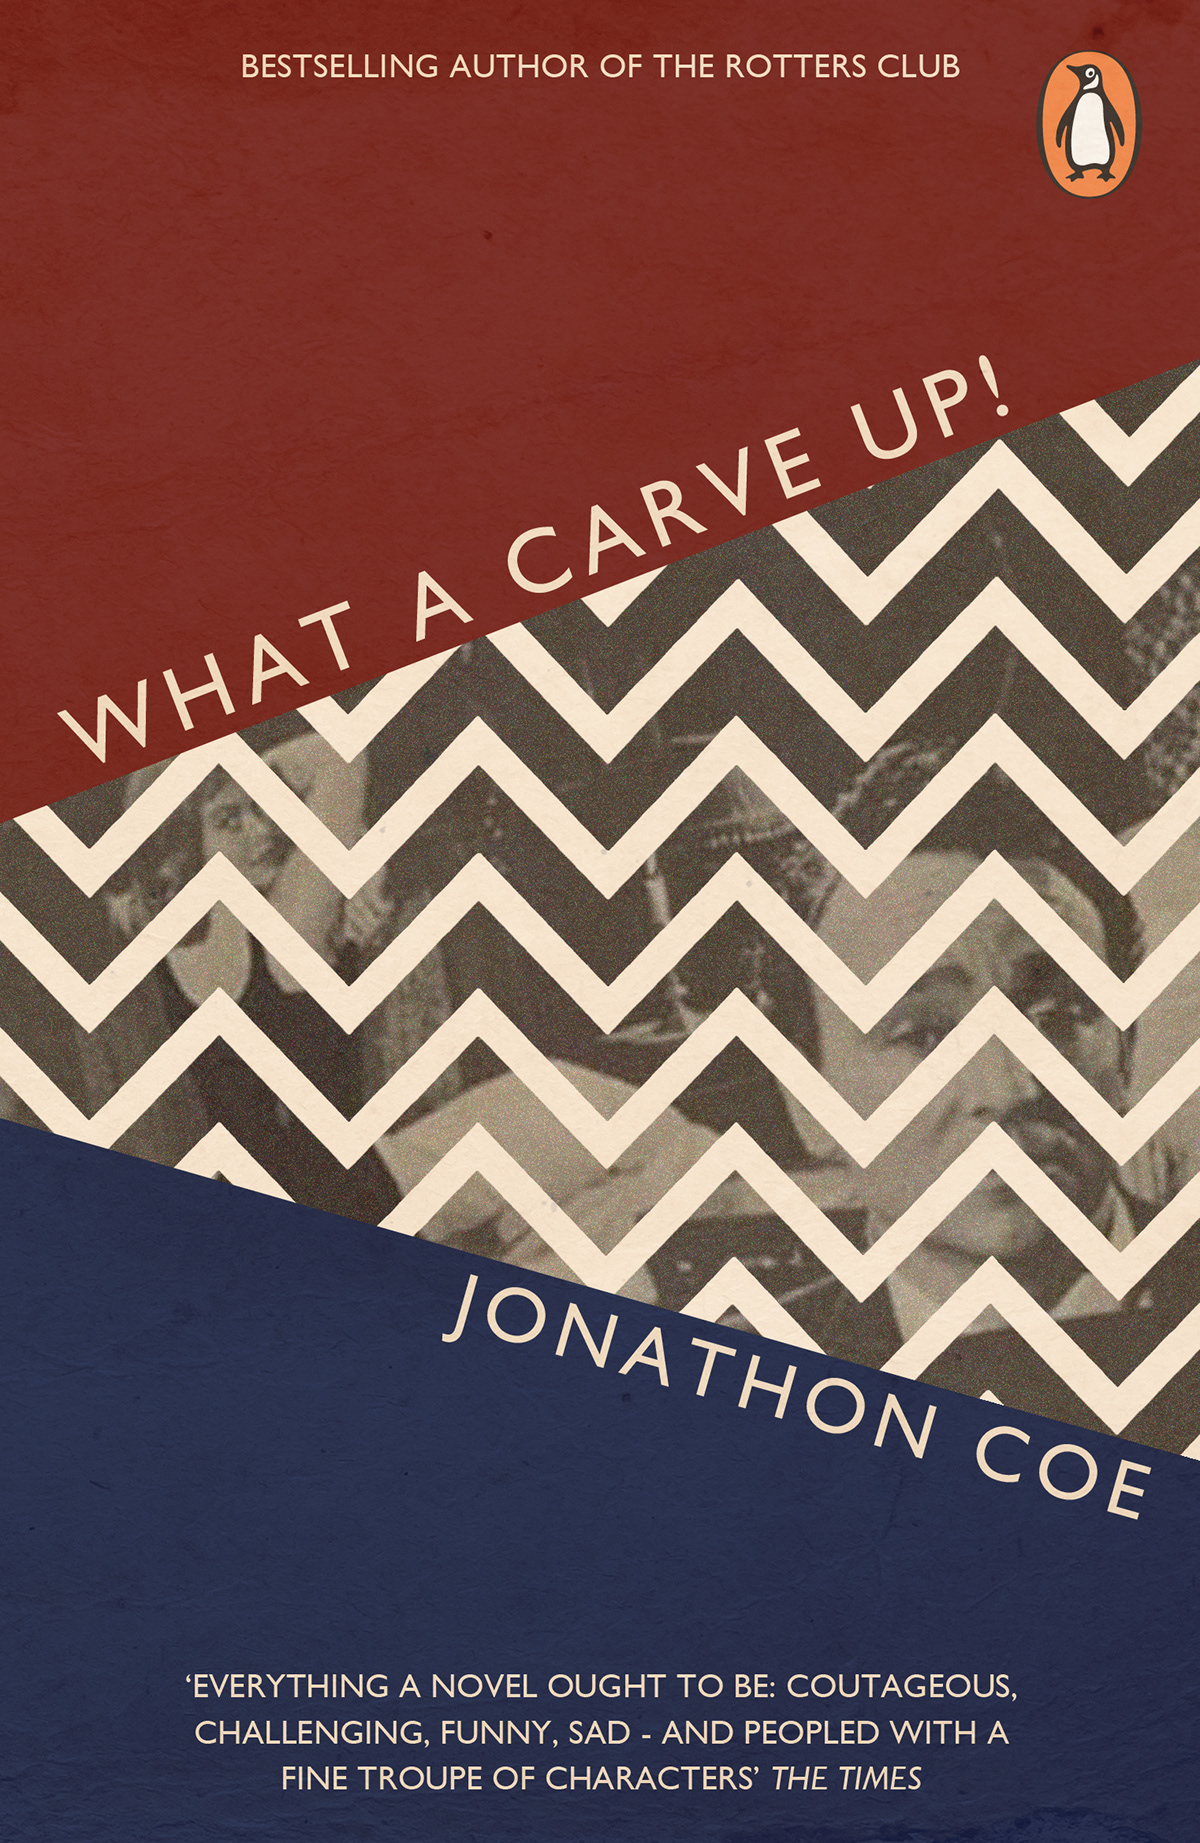 Carve Up What A book book cover design red blue sepia typographic books abstract new Typeface zigzag johnaton coe